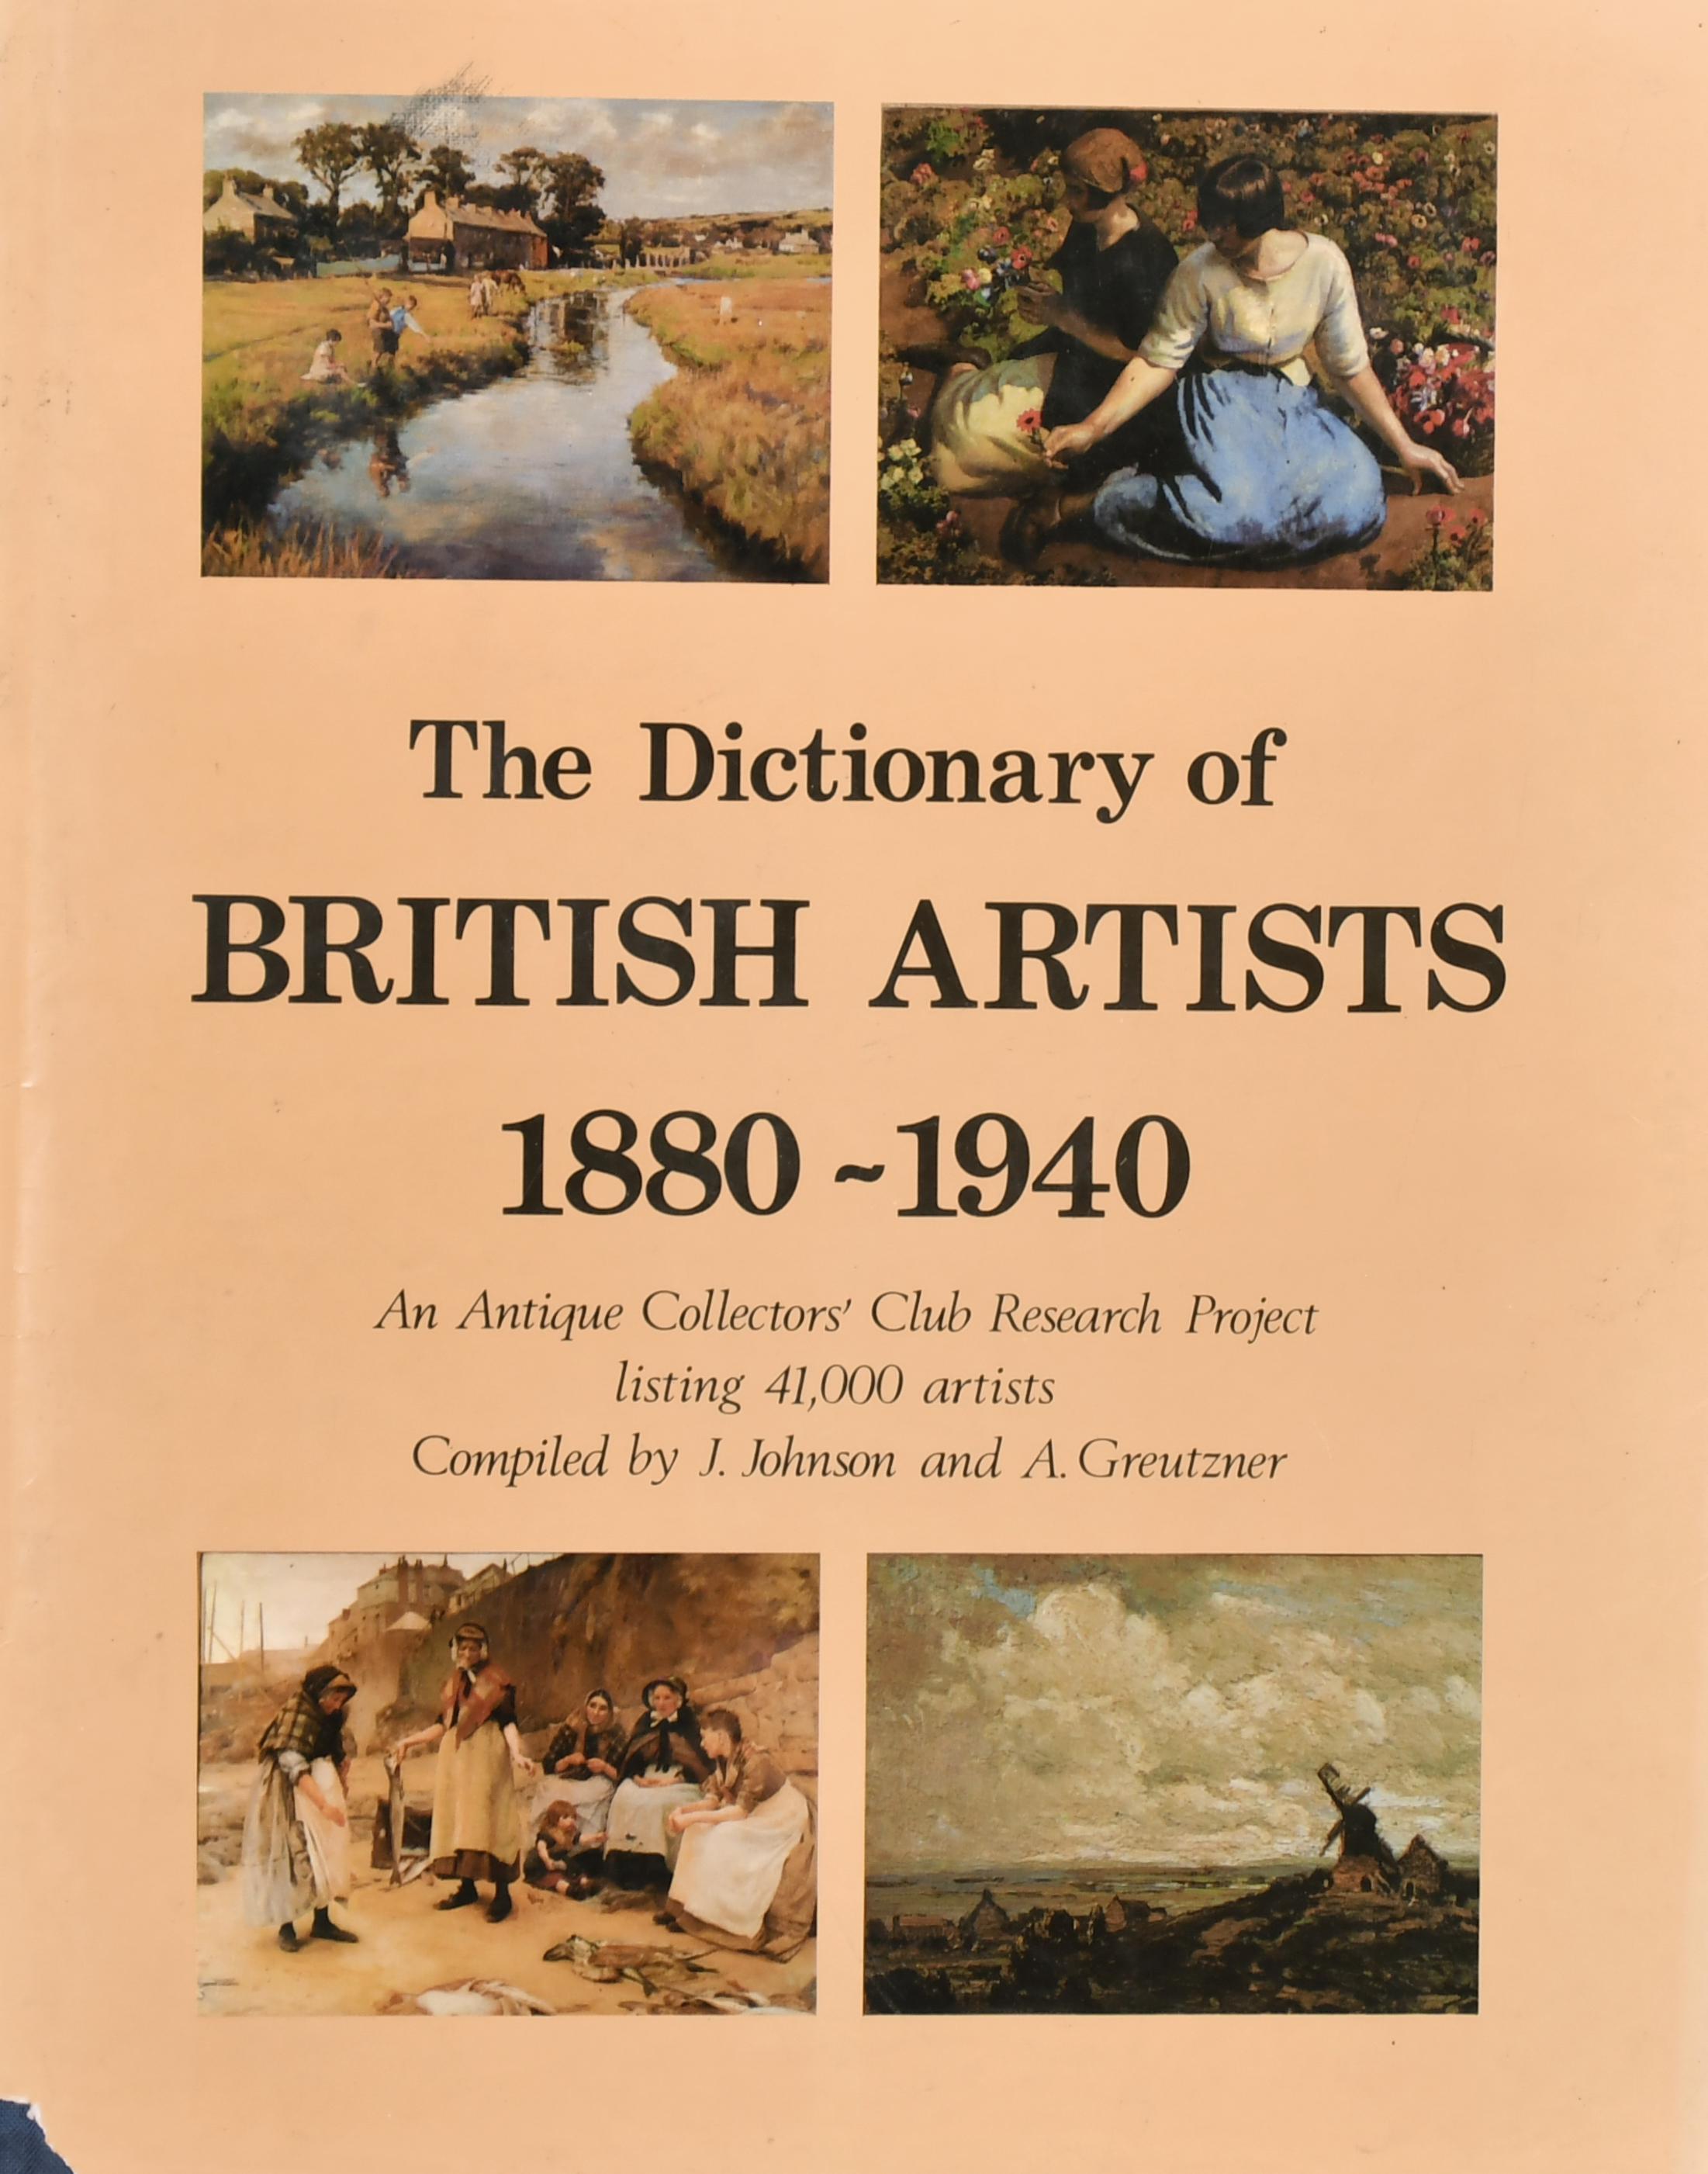 The Dictionary of British Artists 1880-1940, Published by Antique Collector’s Club, and seven